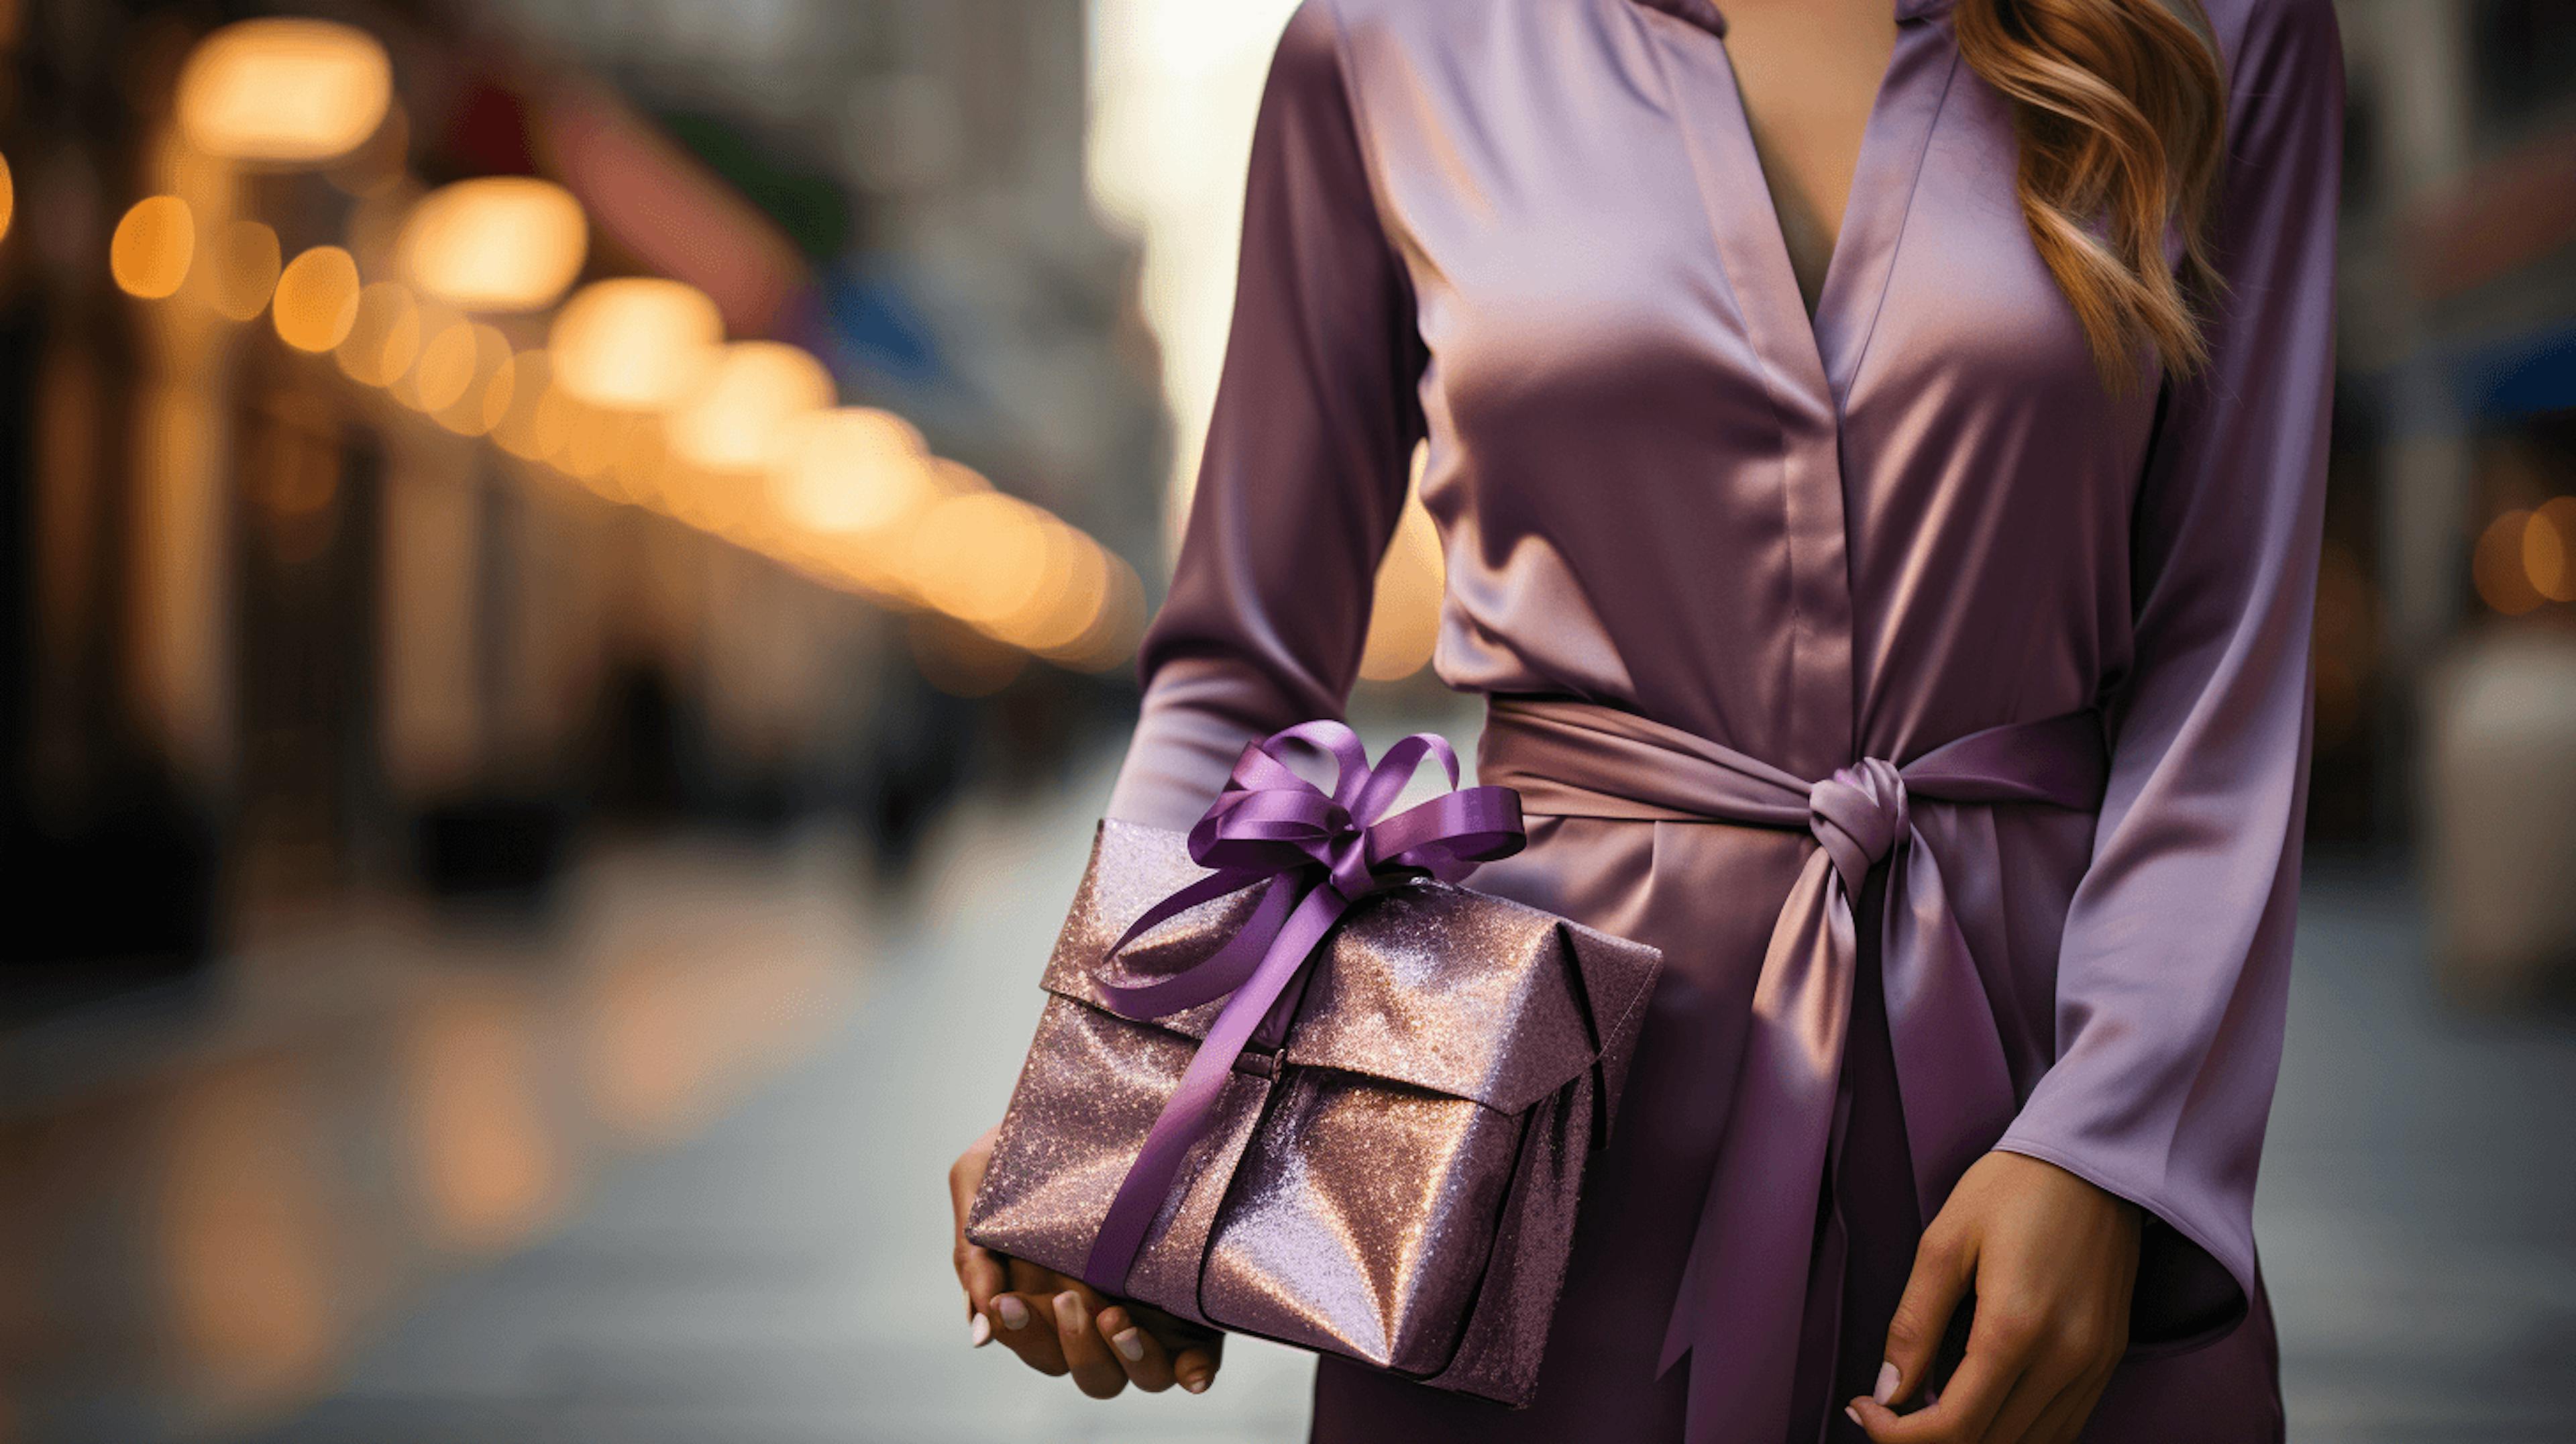 a woman in a purple coat with a bow tied present dressed up in her robe holding the present